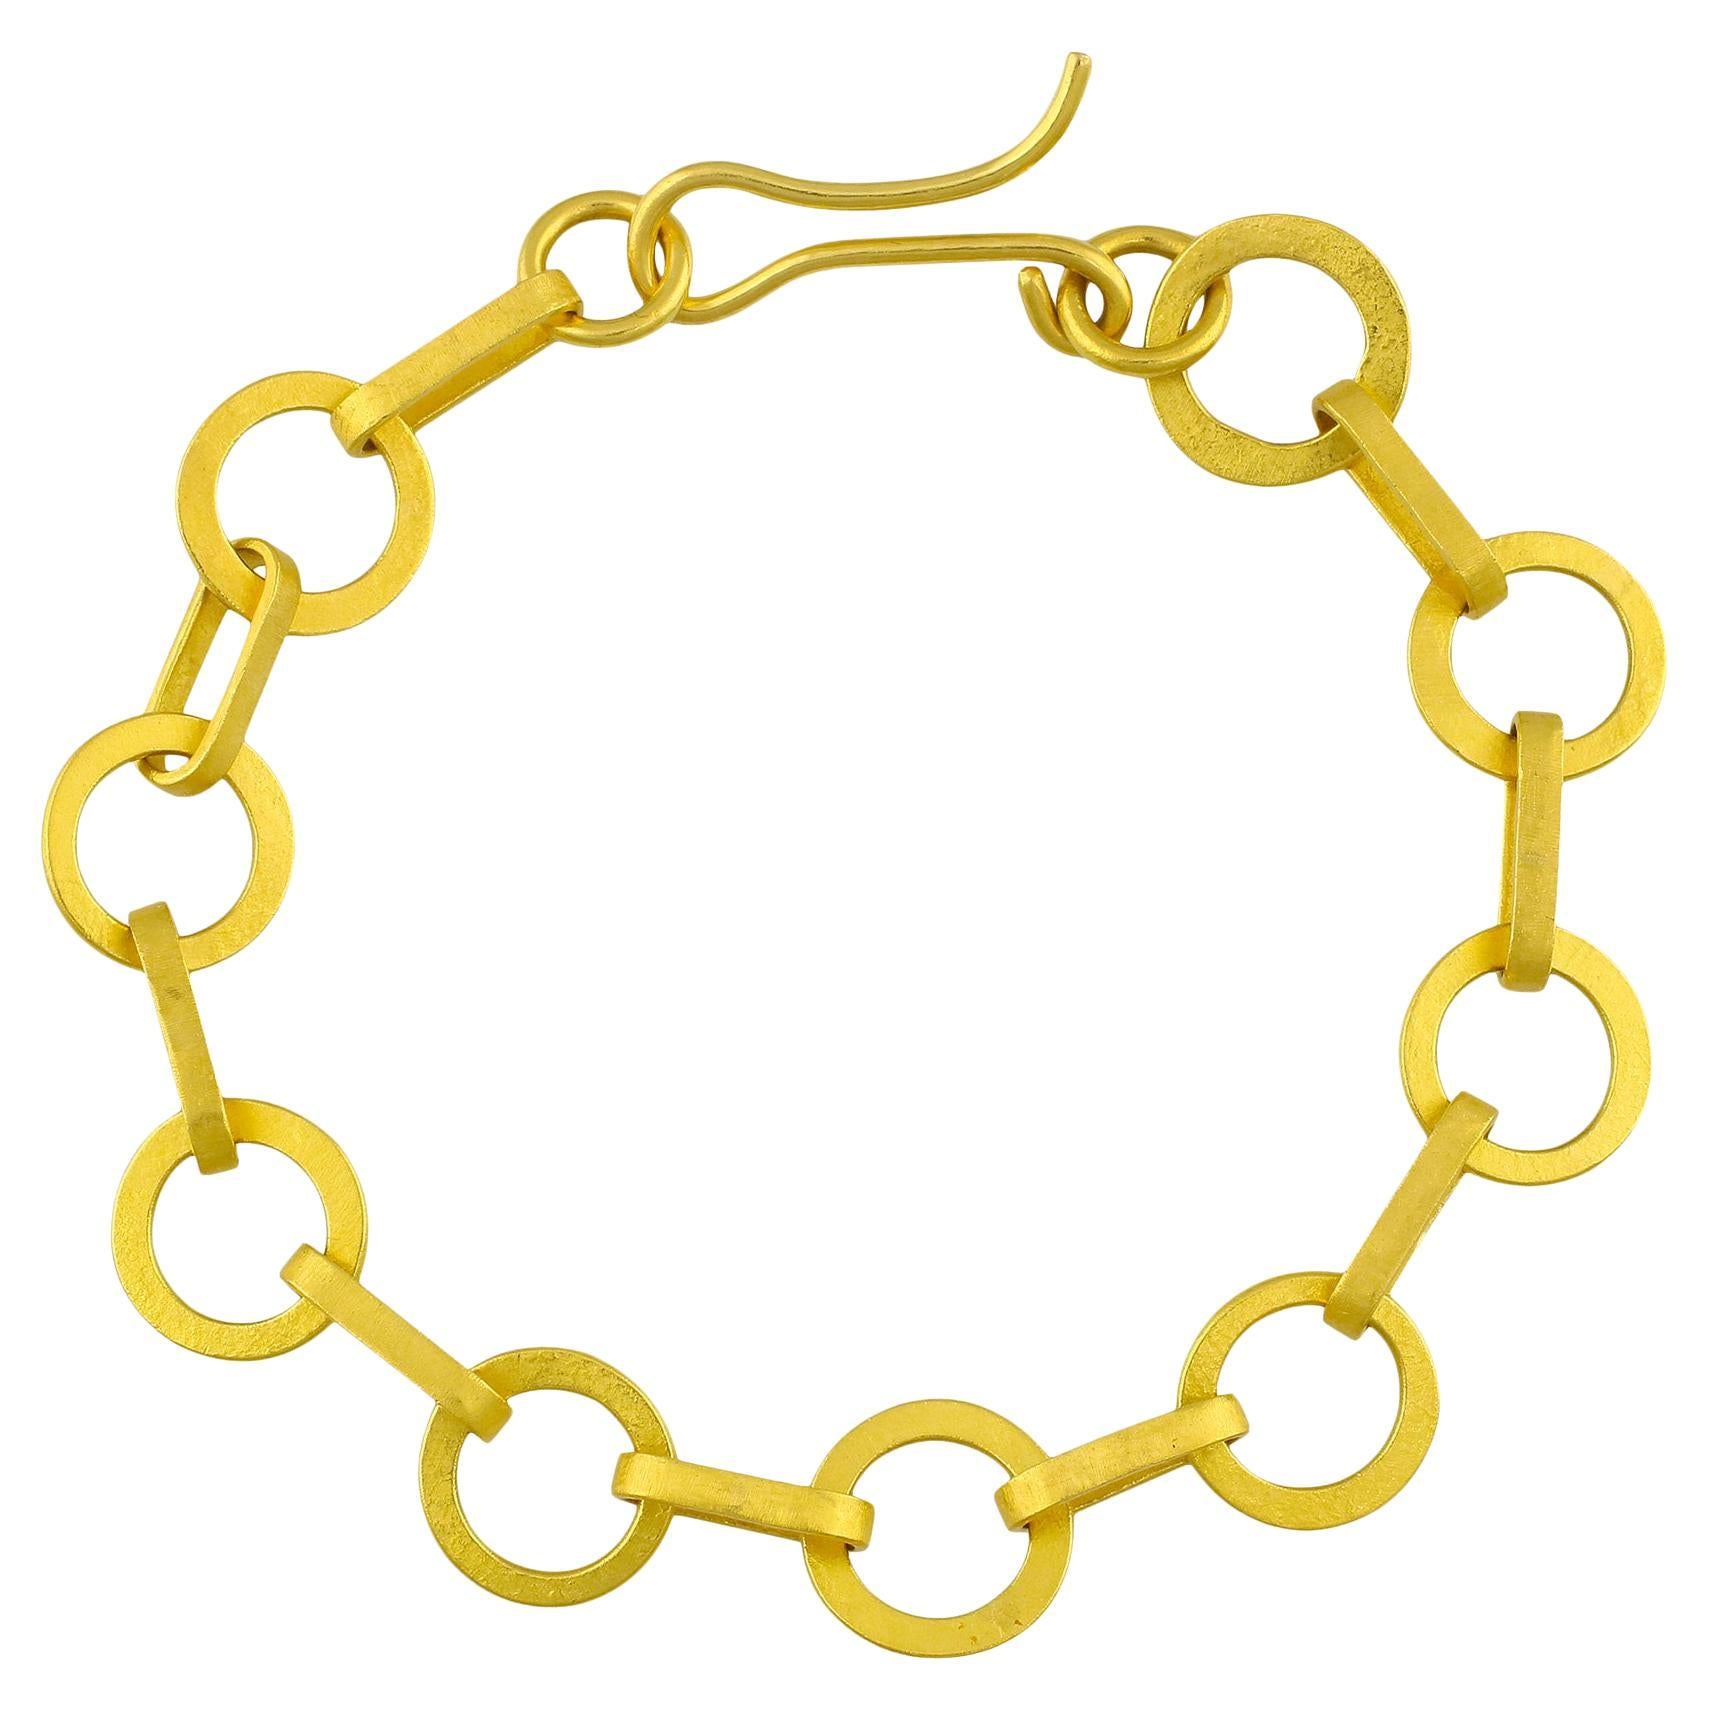 PHILIPPE SPENCER Solid 22K Gold Completely Hand-Forged Round Link Bracelet